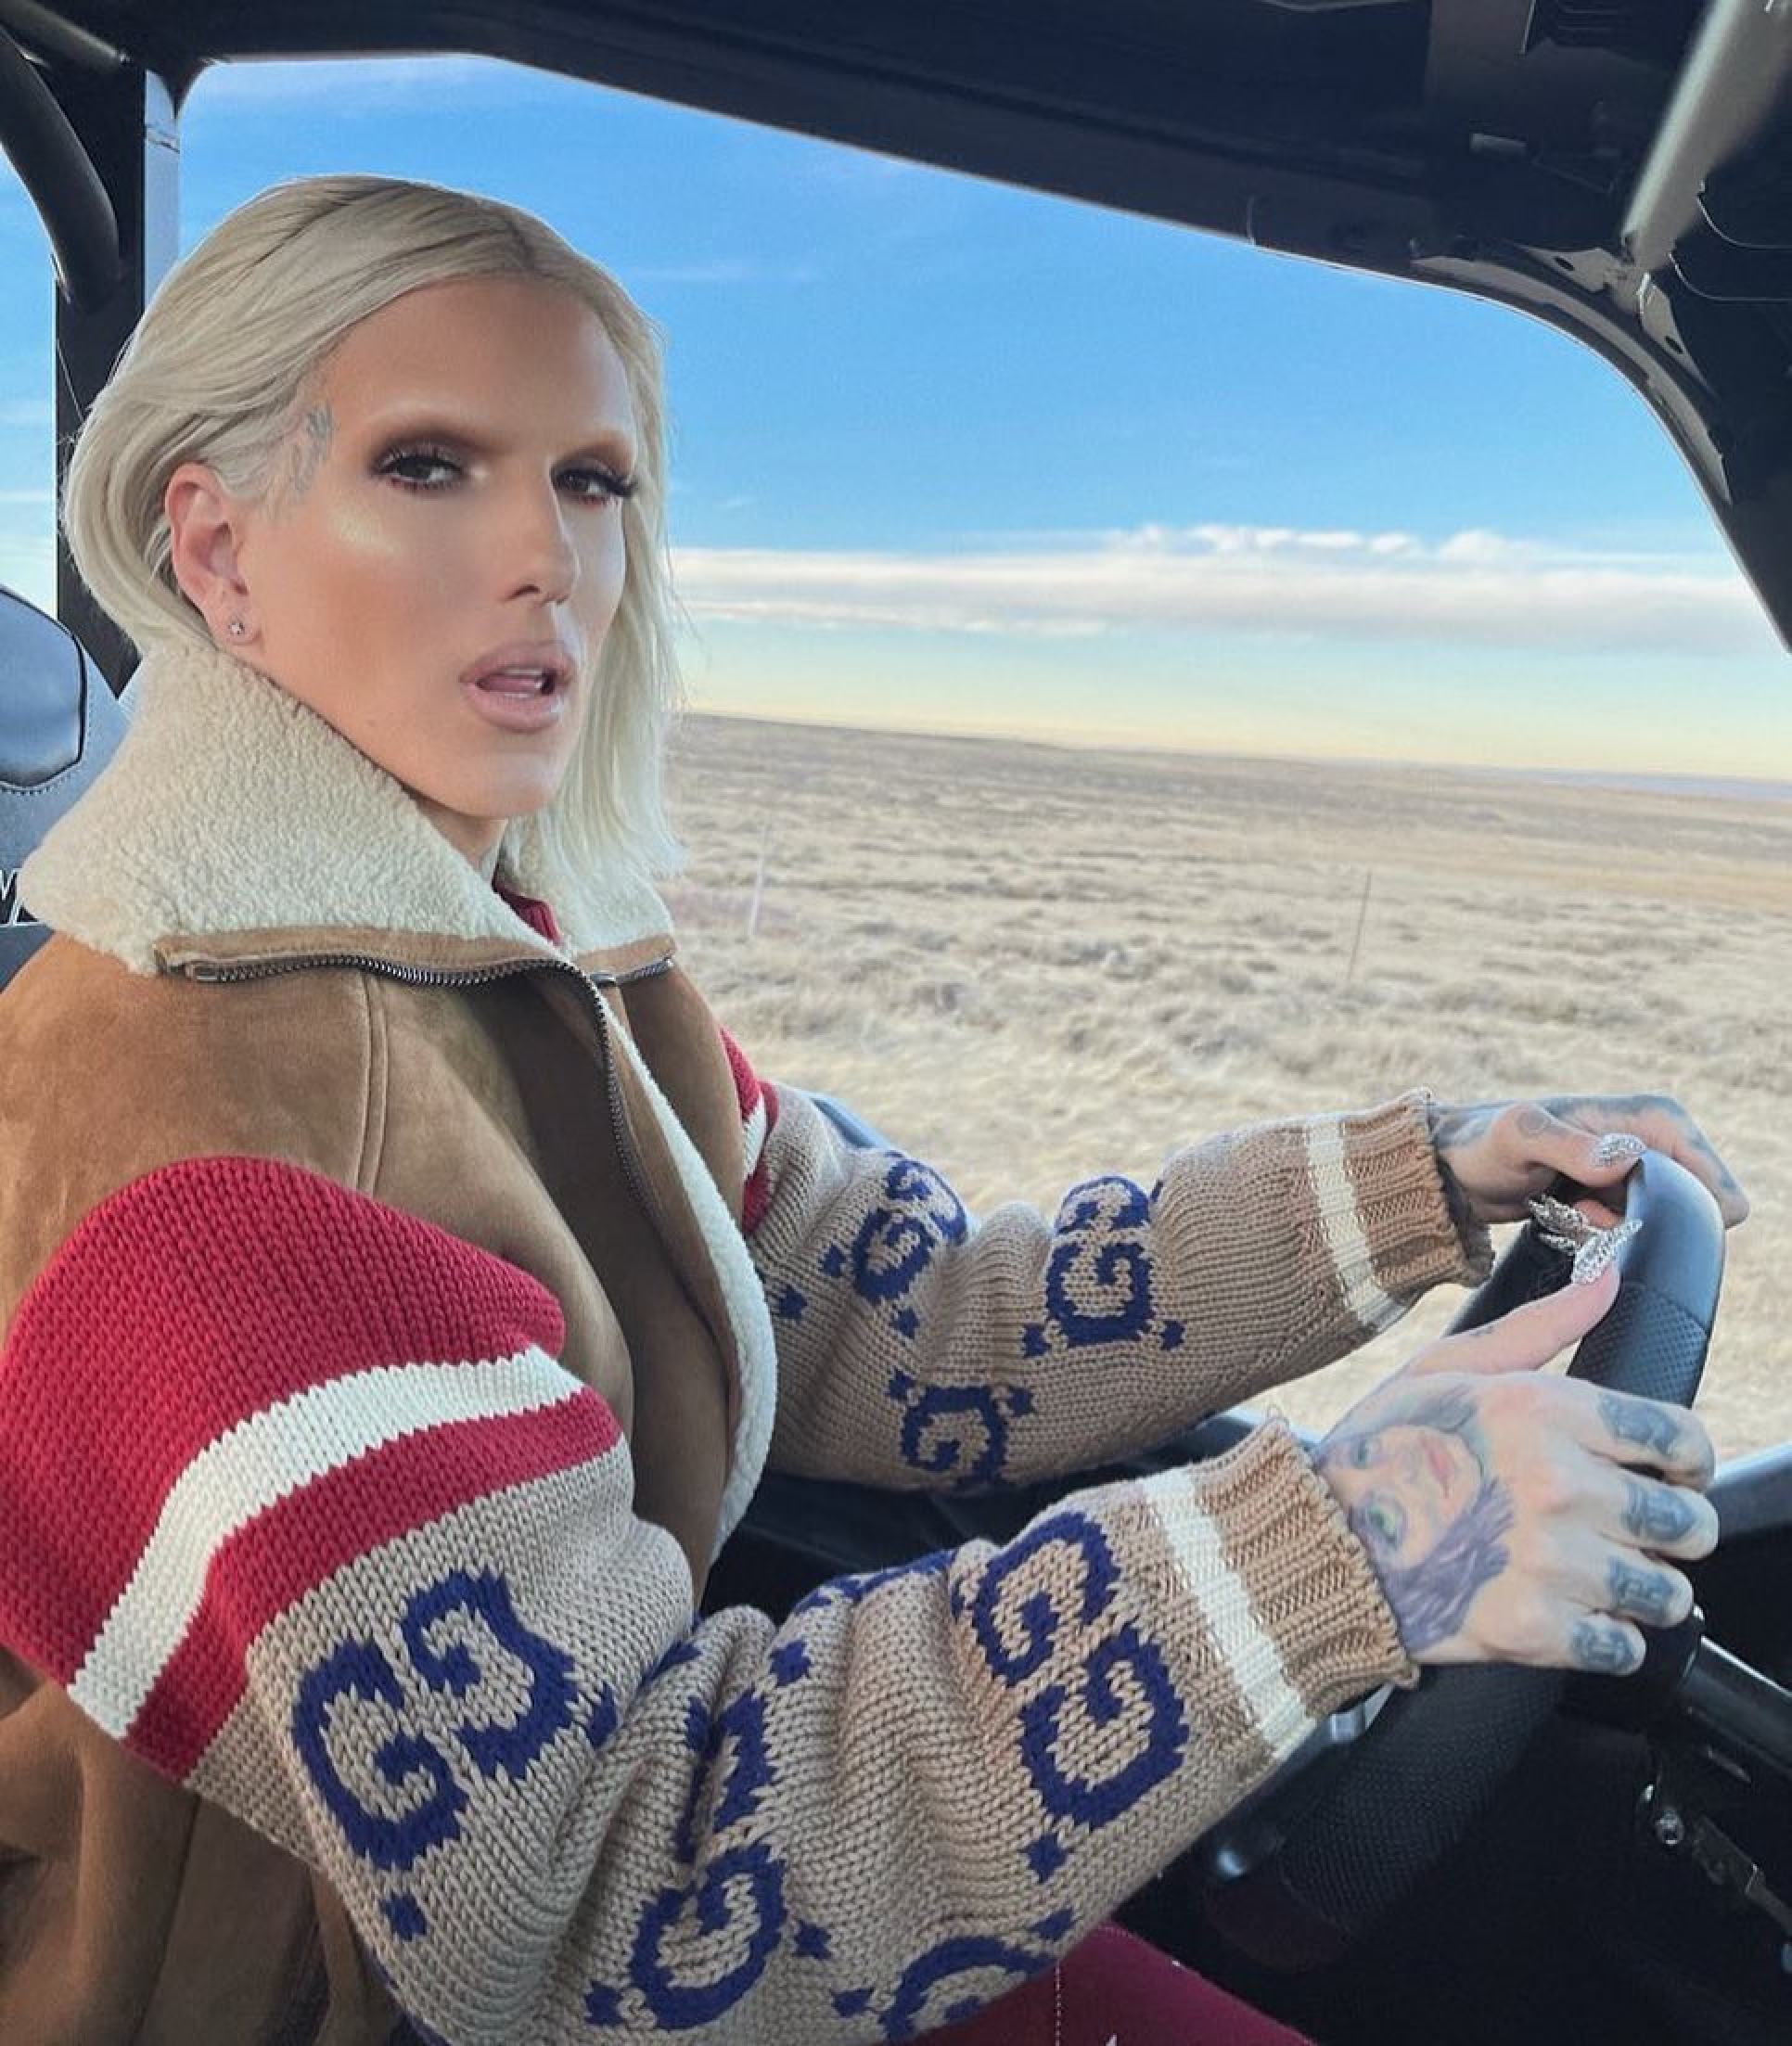 Inside Jeffree Star's controversial US$200 million net worth: the